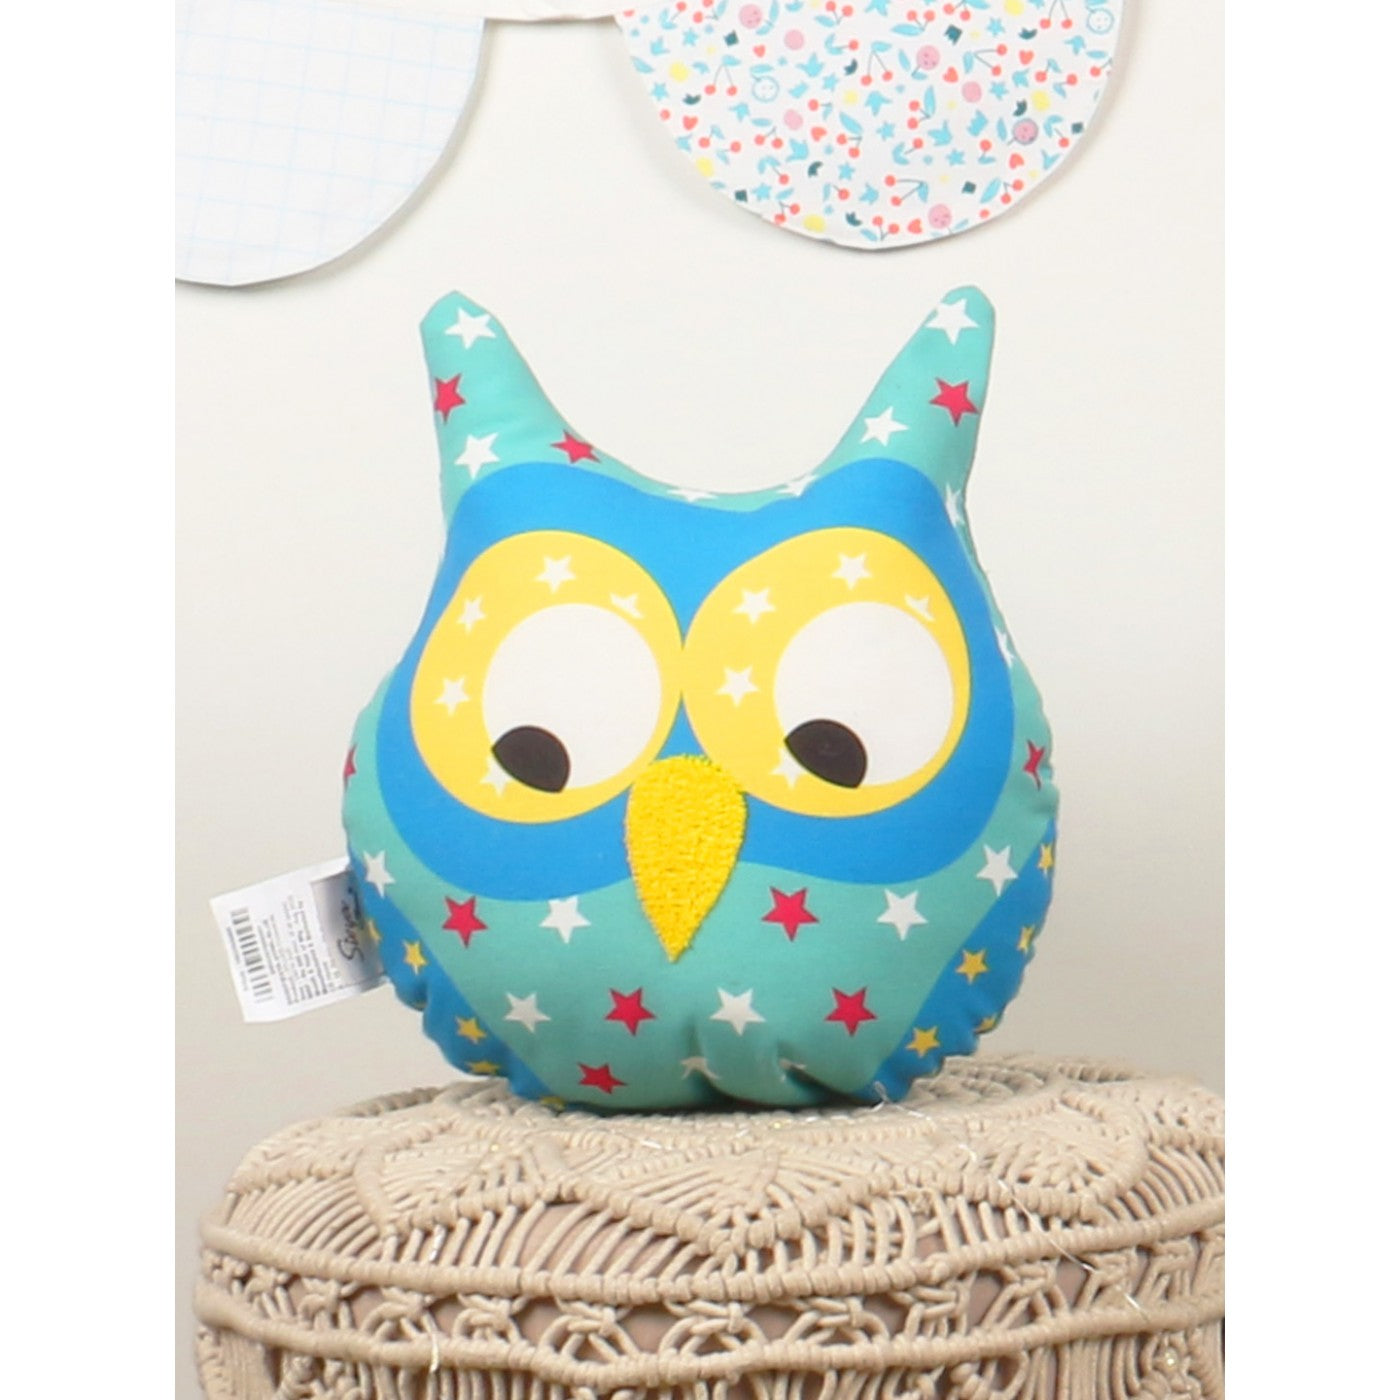 Whimsical Wisdom: Owl-Shape Comfort in Polyduck Cushion